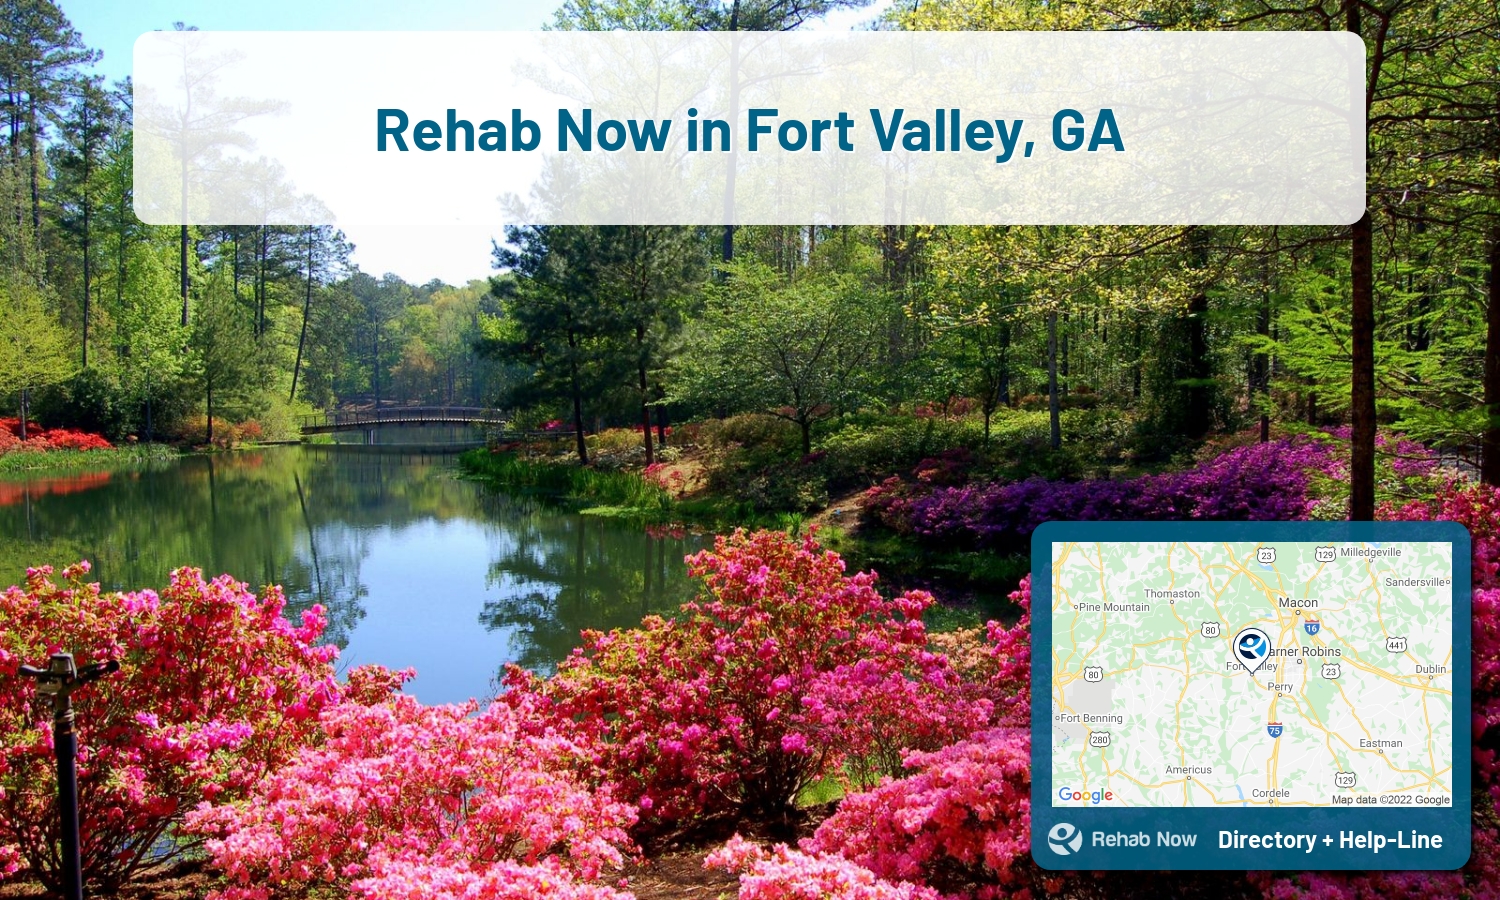 Drug rehab and alcohol treatment services nearby Fort Valley, GA. Need help choosing a treatment program? Call our free hotline!